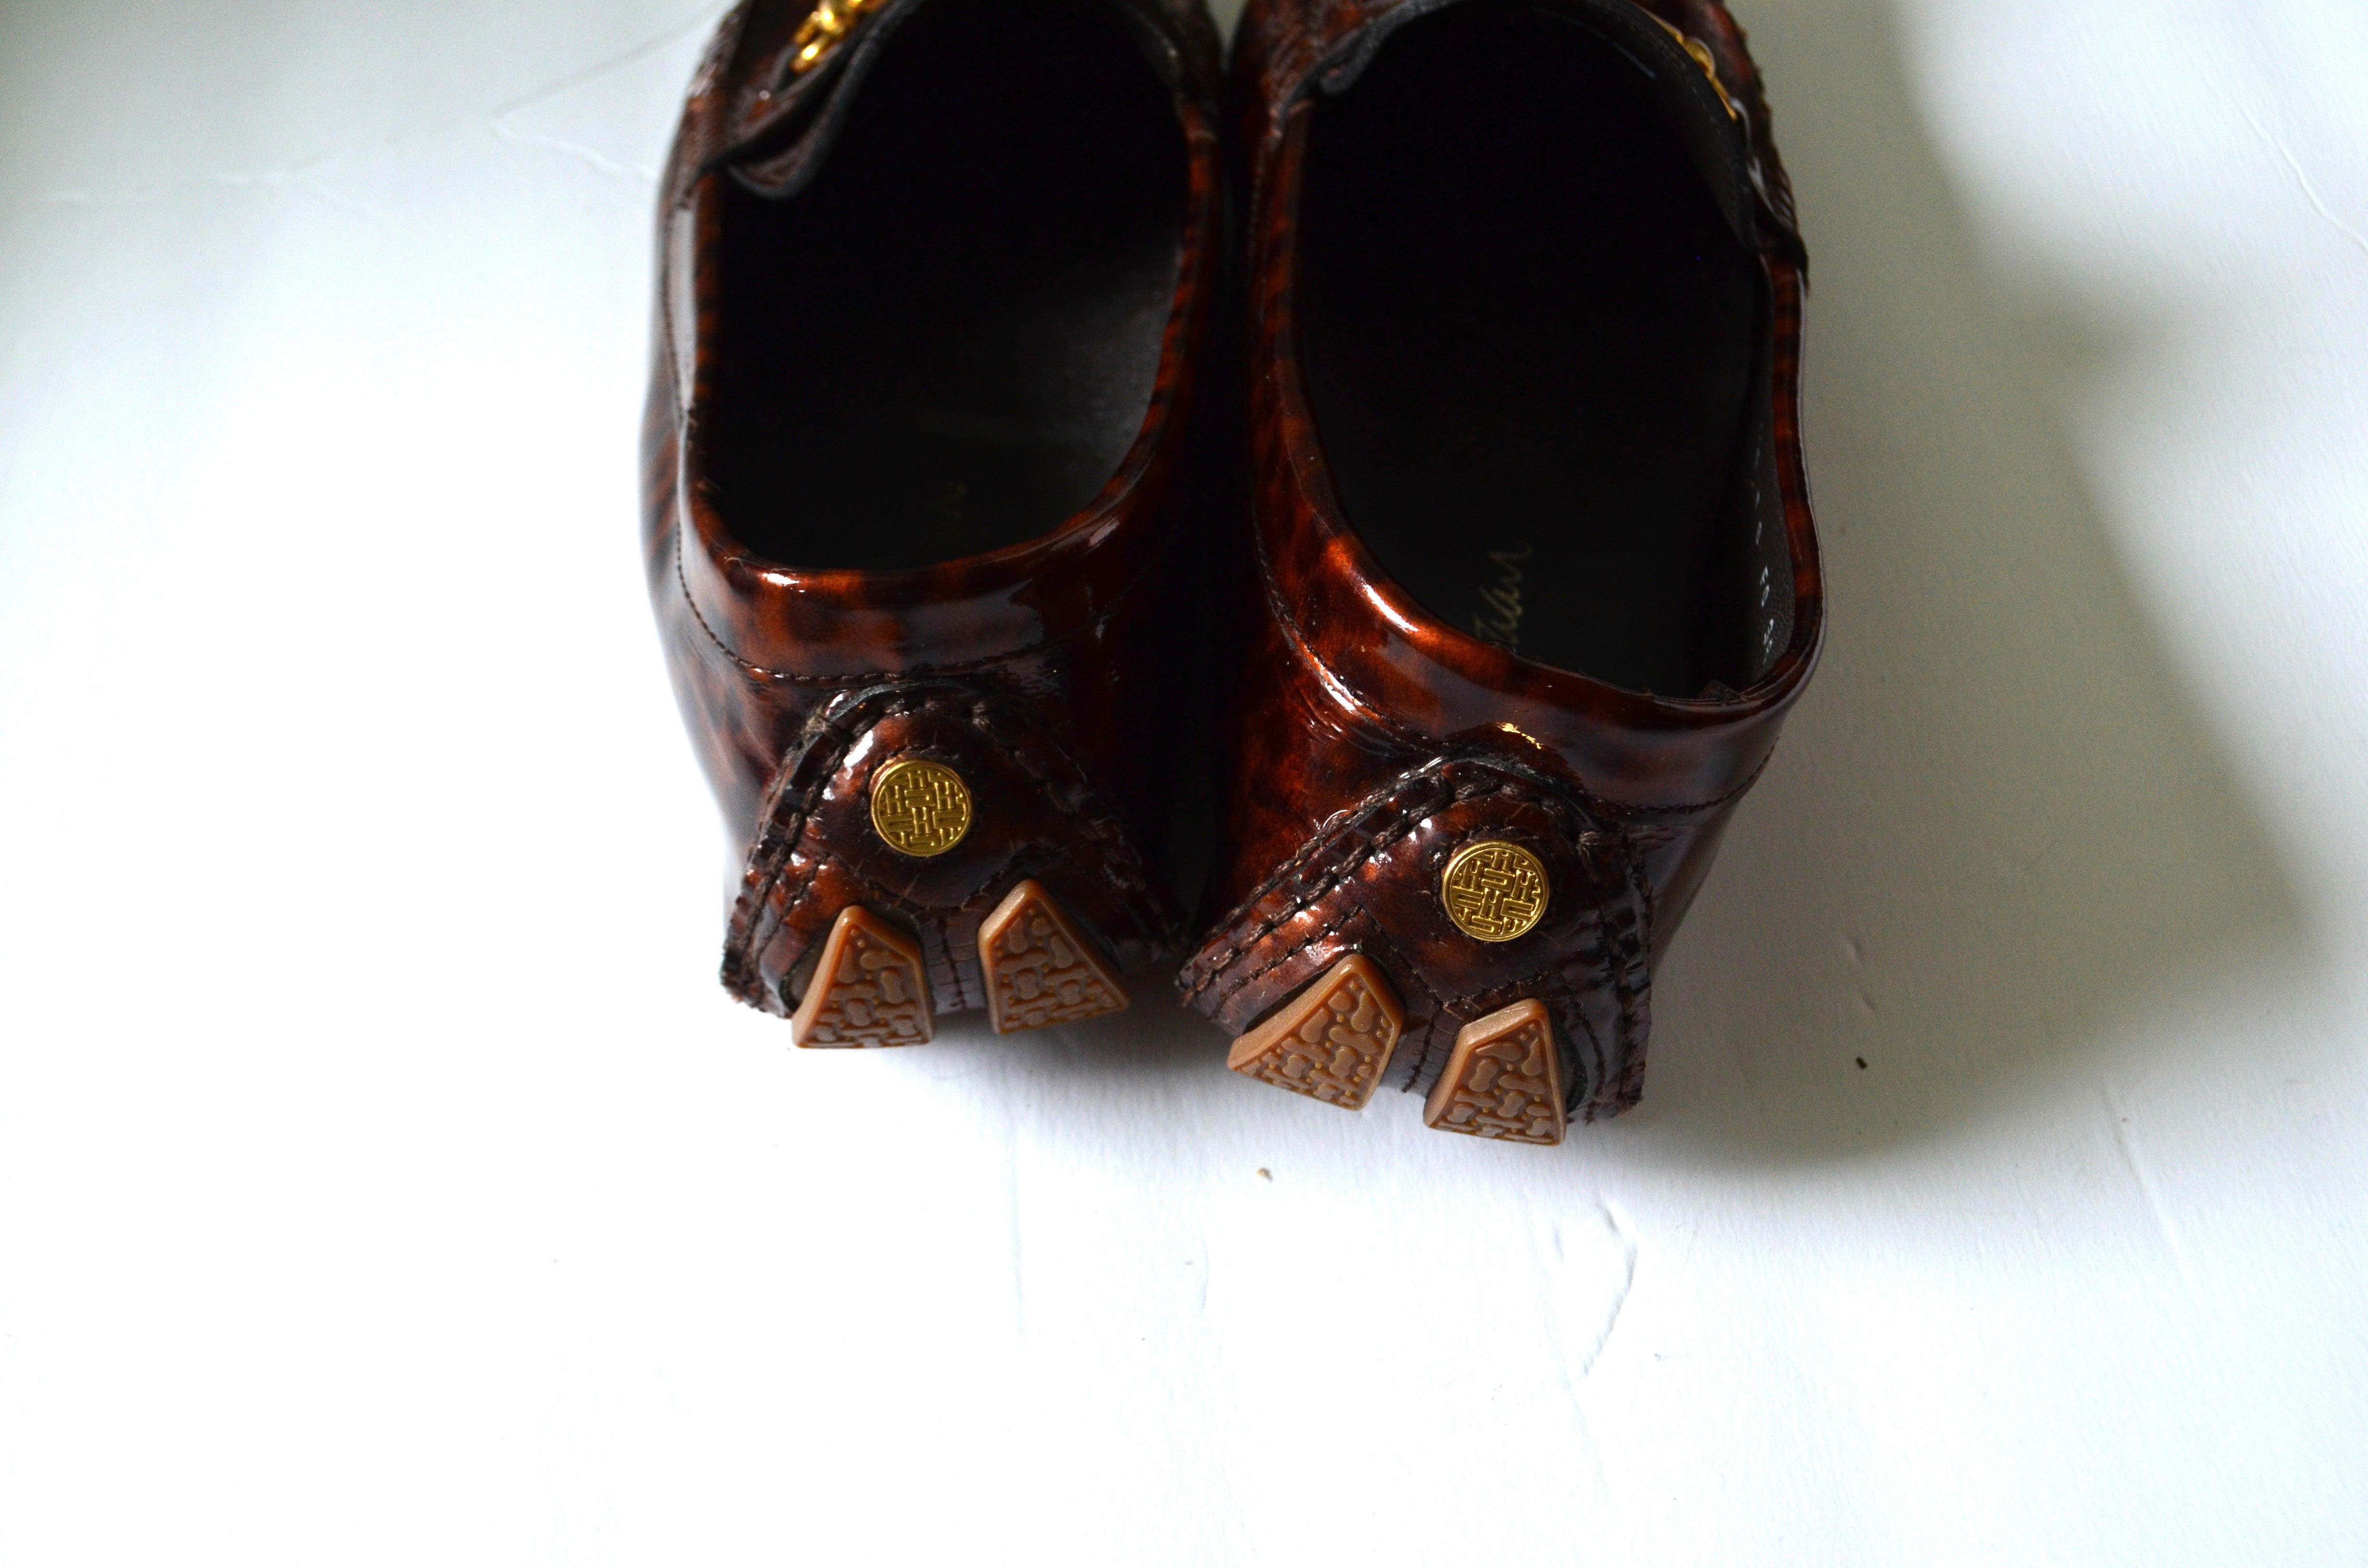 COLE HANN Brown Tortoiseshell patent leather Loafers gold Horsebit Authentic Shoes Women's size 38 Italy